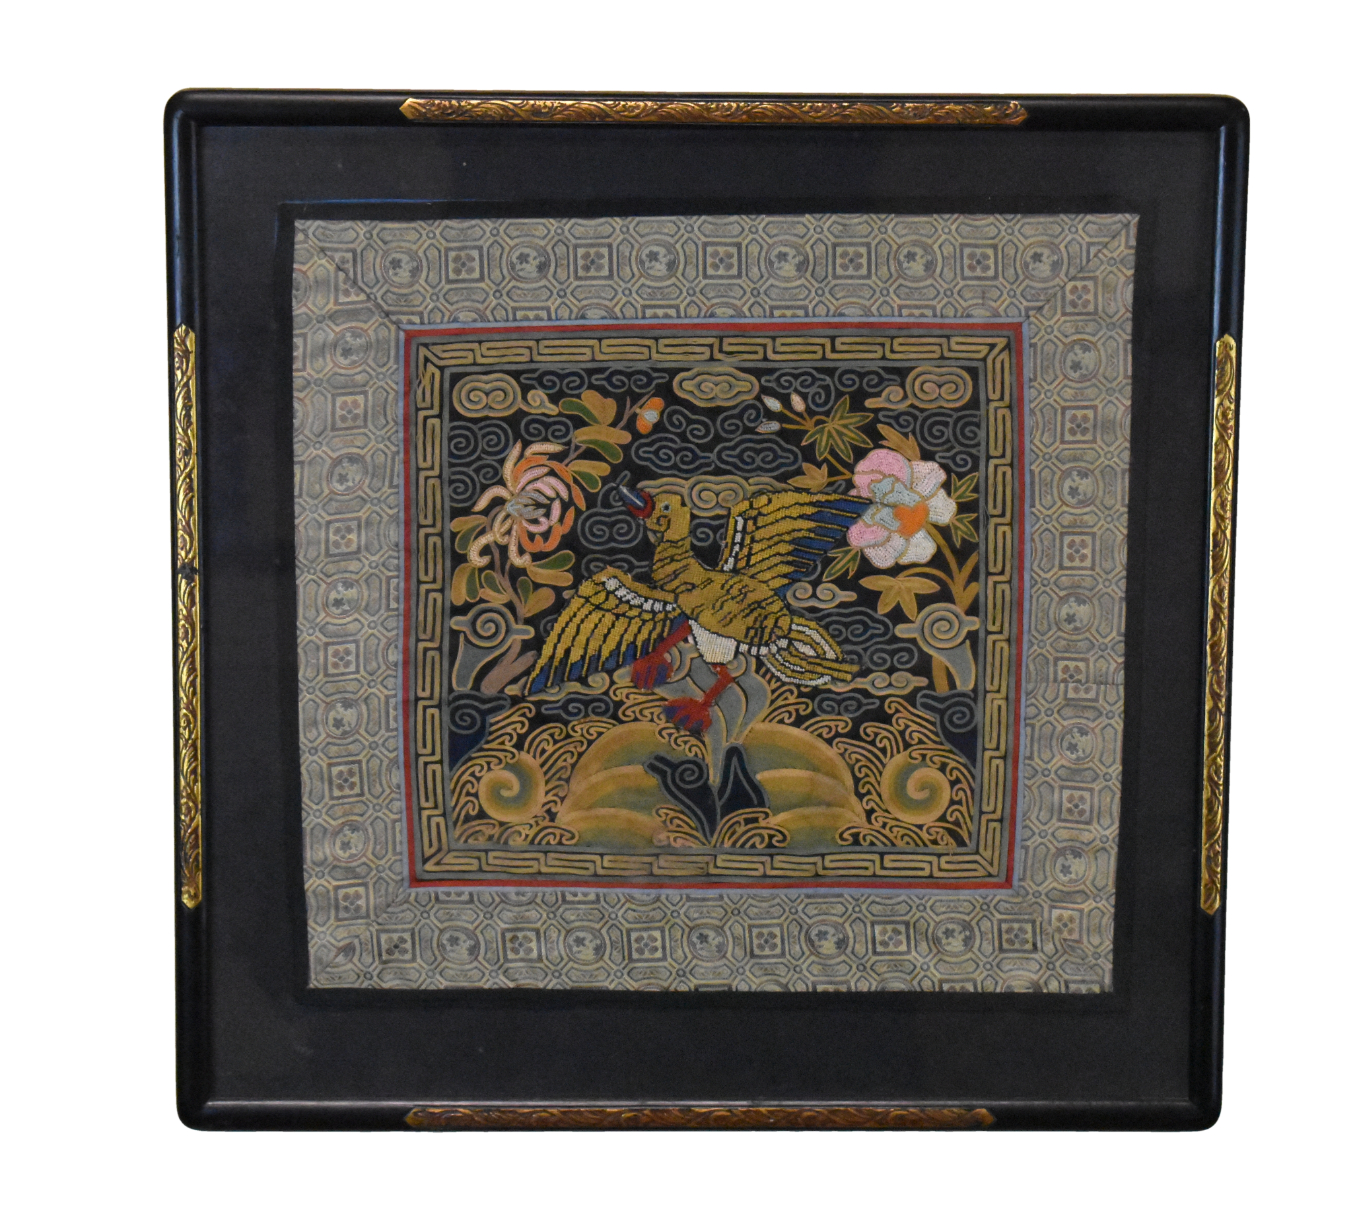 CHINESE FRAMED EMBRODEIRY BUZI  33a810